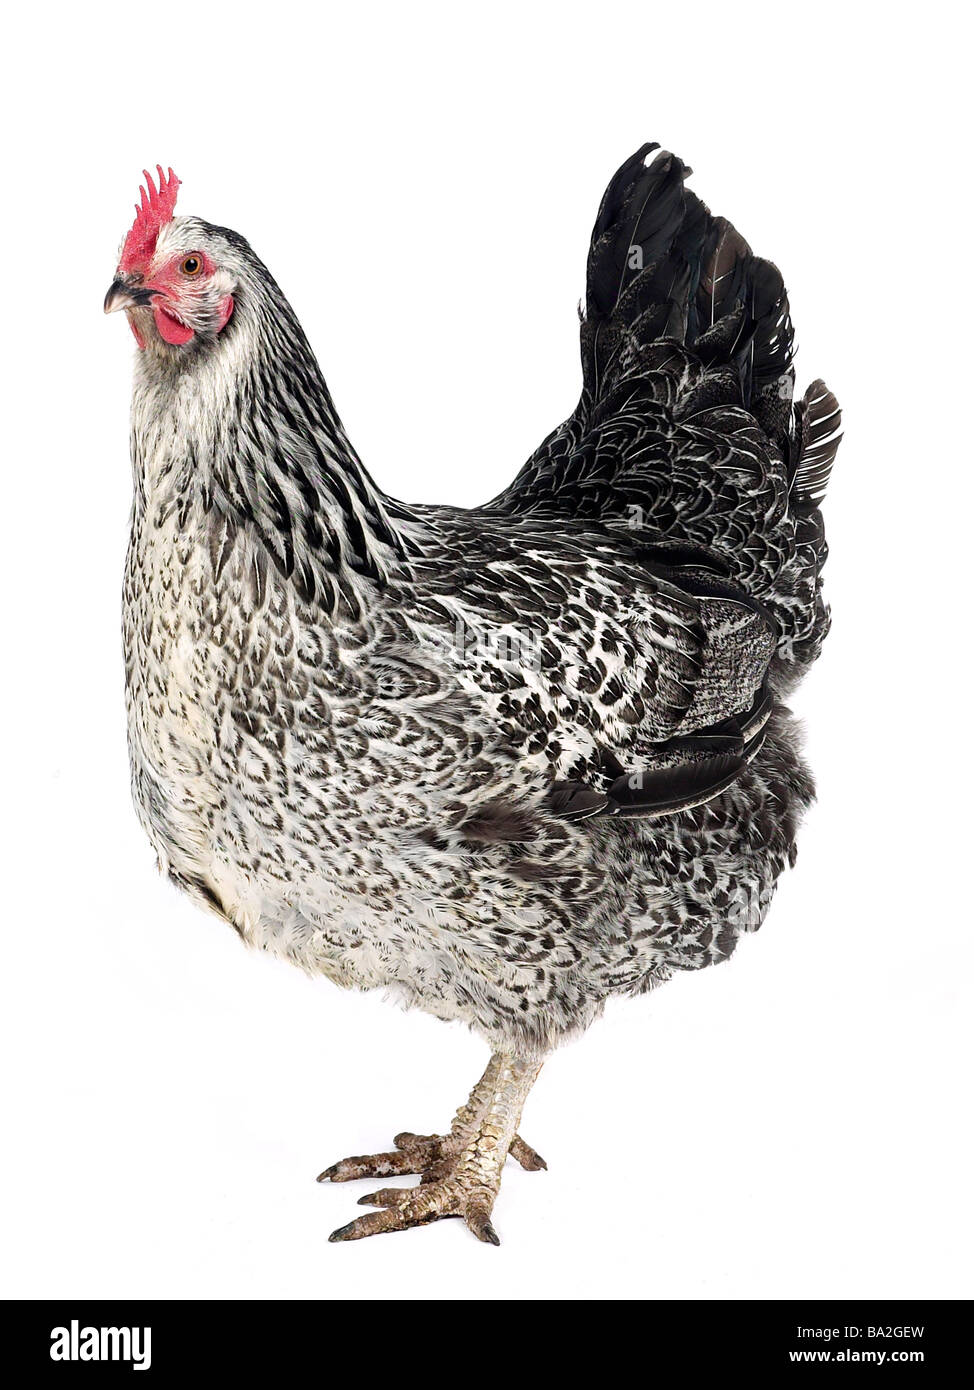 A black and white chicken. Stock Photo